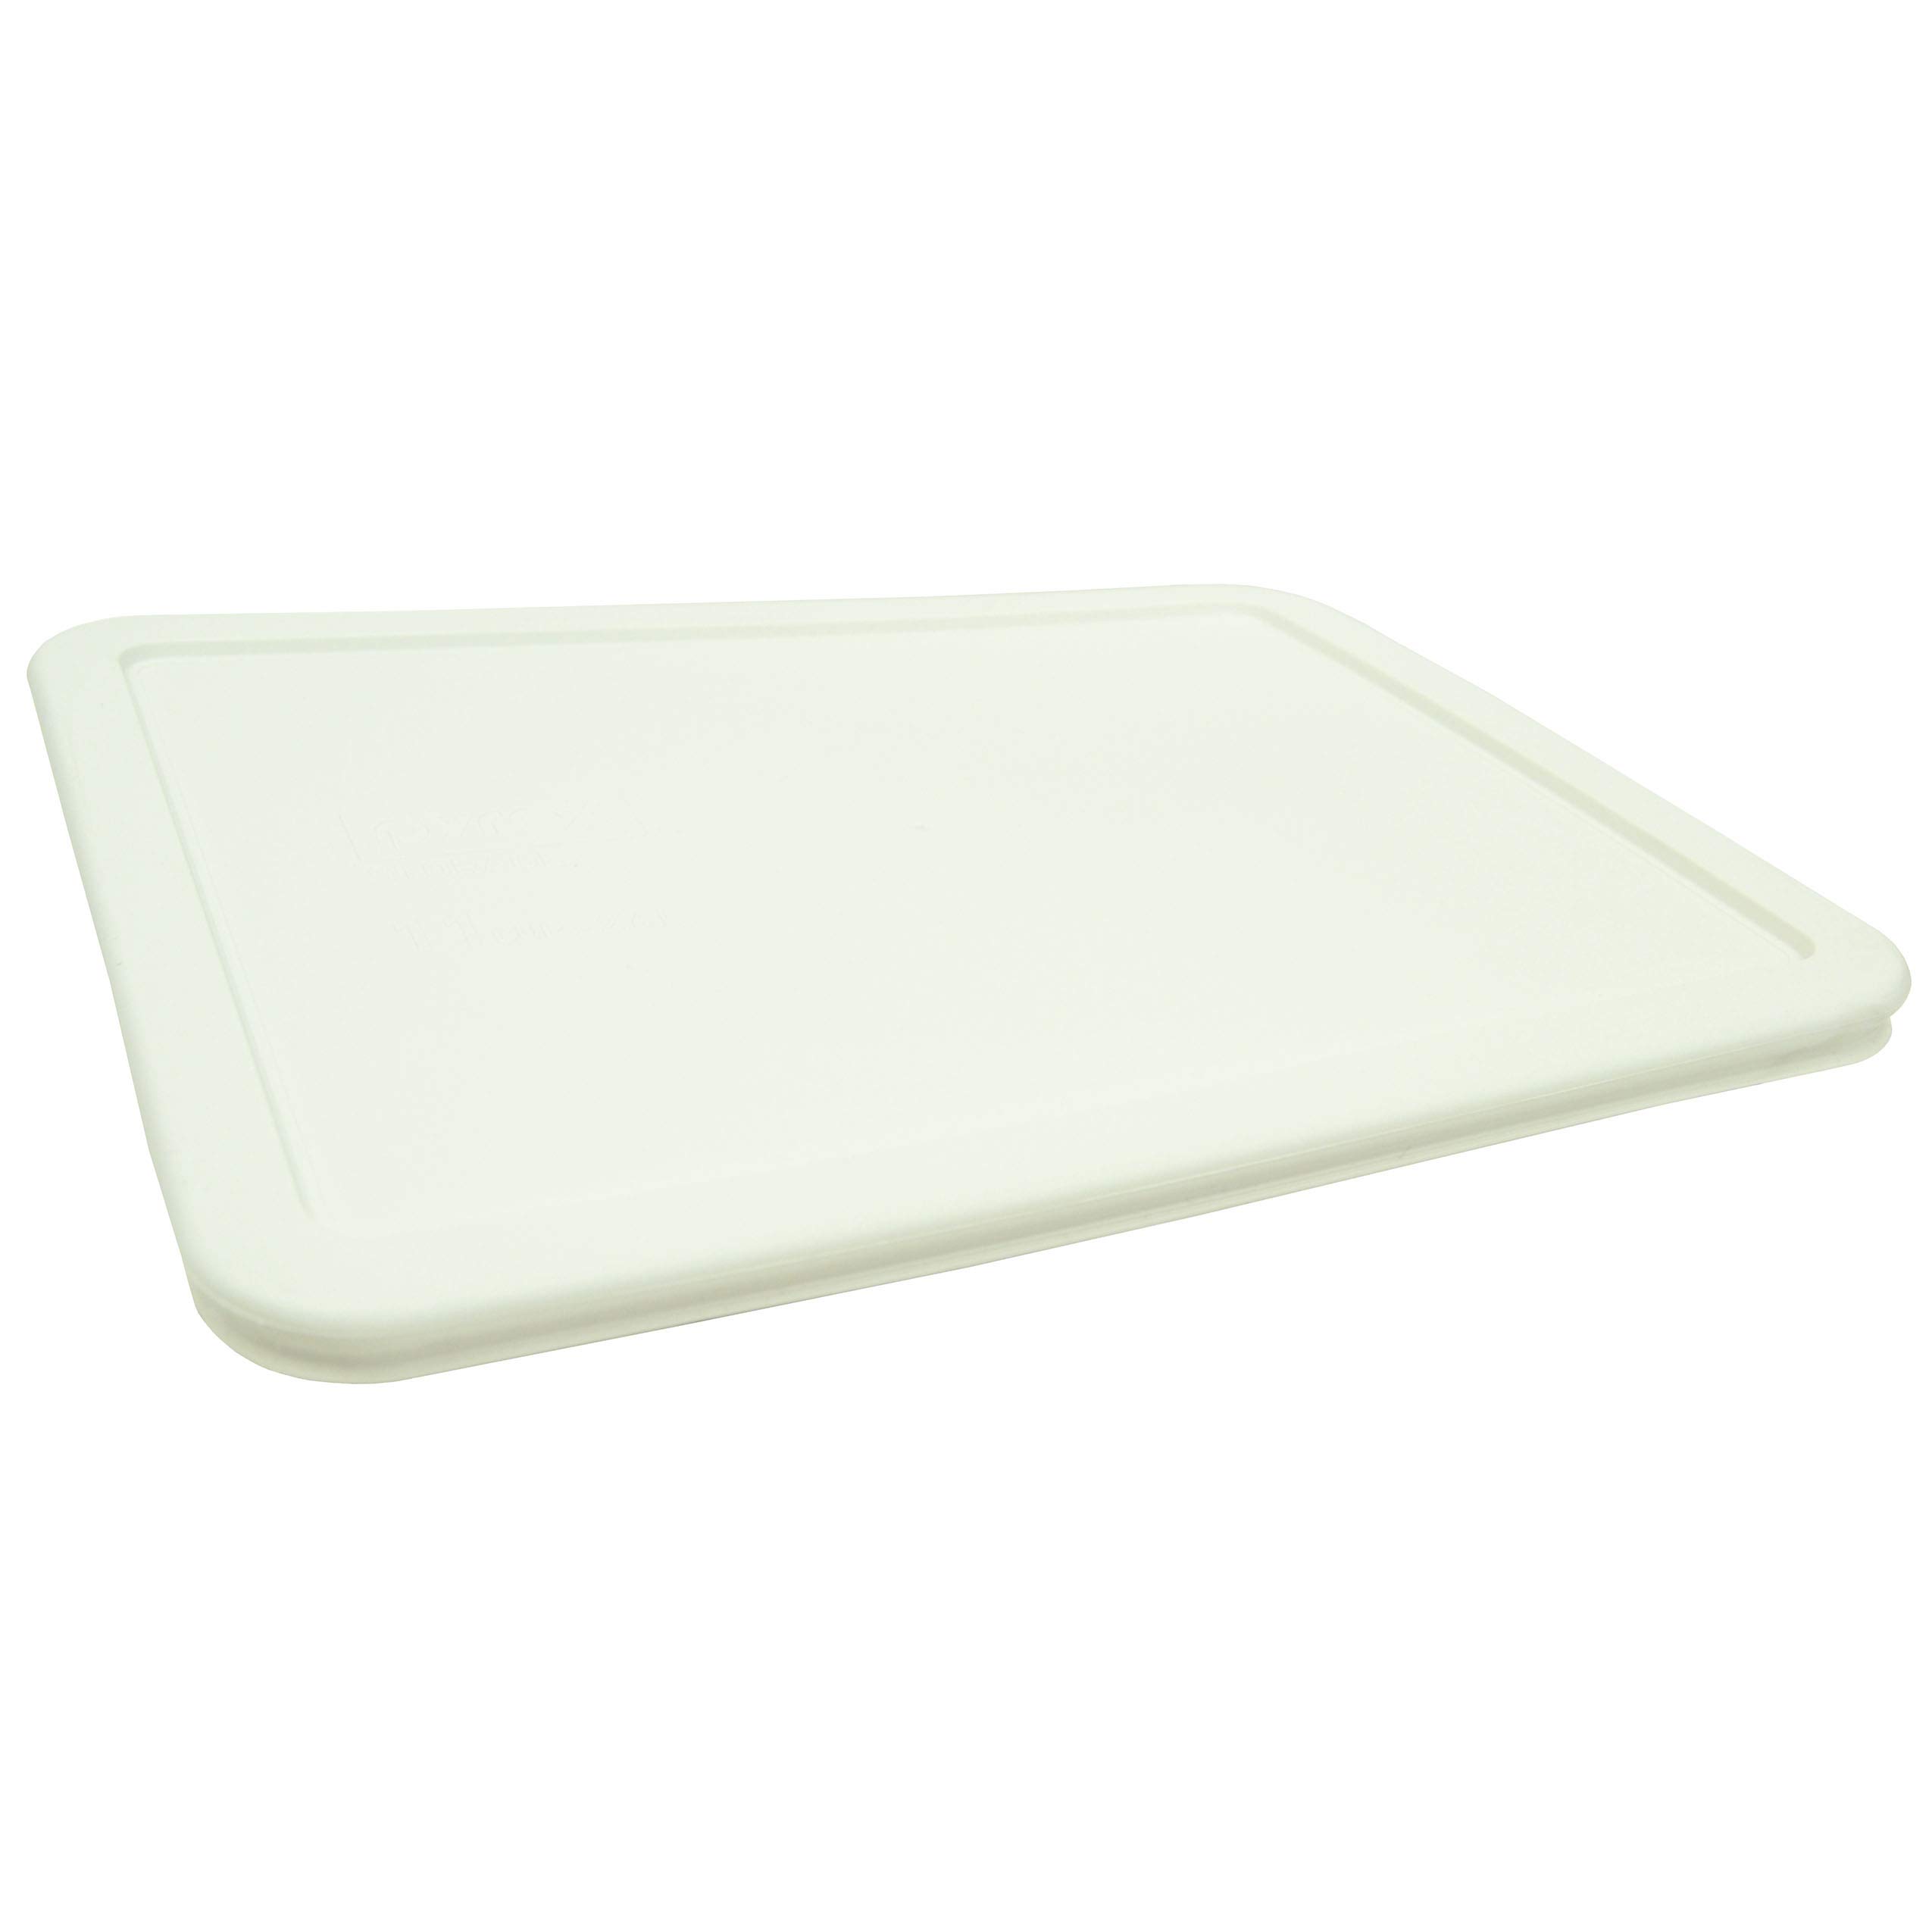 Pyrex 7212-PC White Plastic Rectangle Replacement Storage Lid, Made in USA - 2 Pack